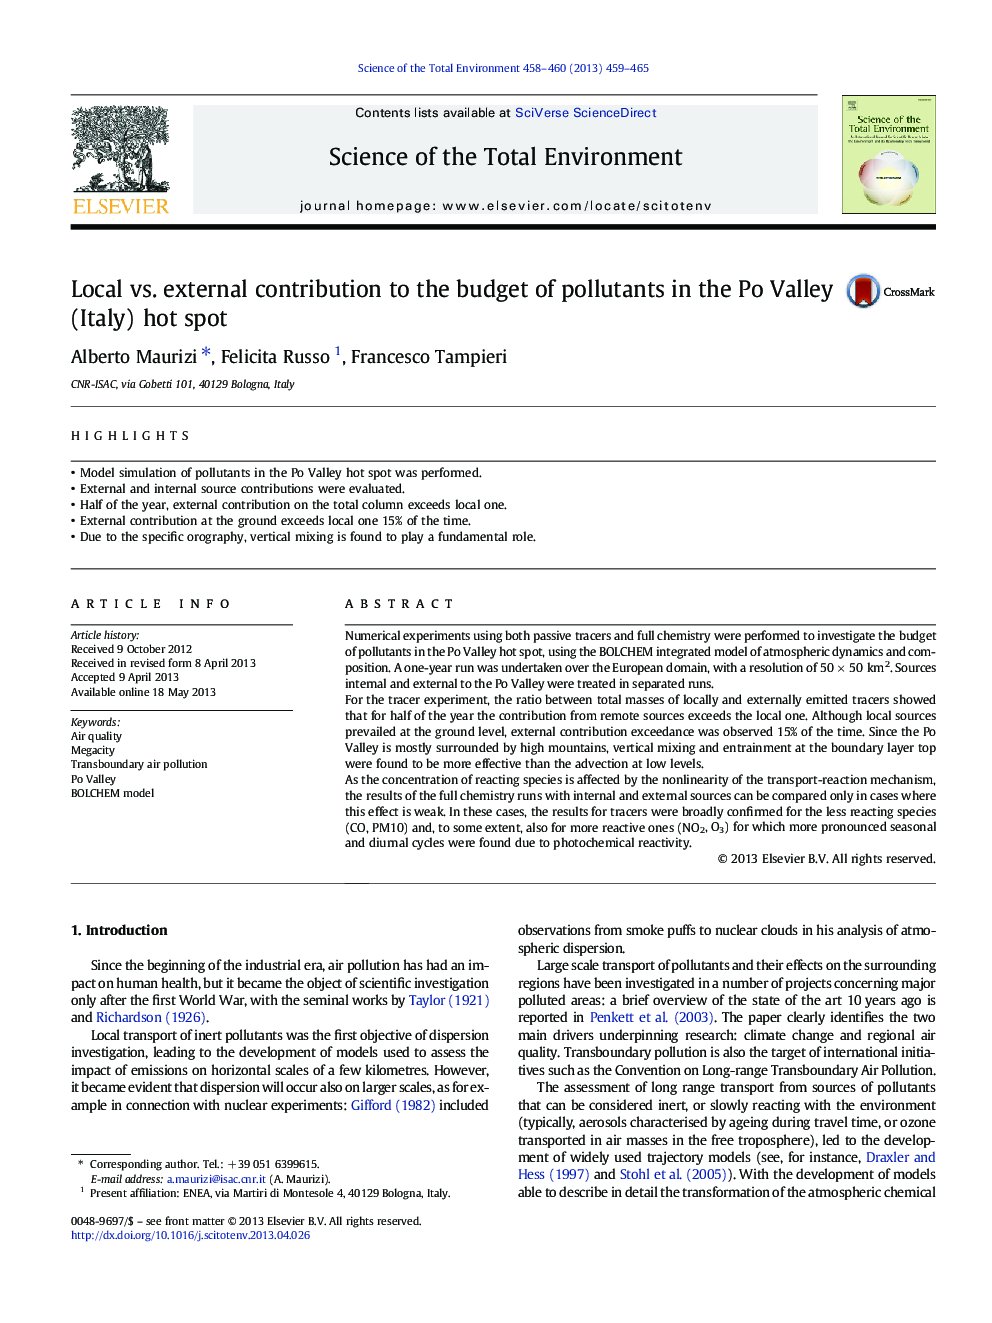 Local vs. external contribution to the budget of pollutants in the Po Valley (Italy) hot spot